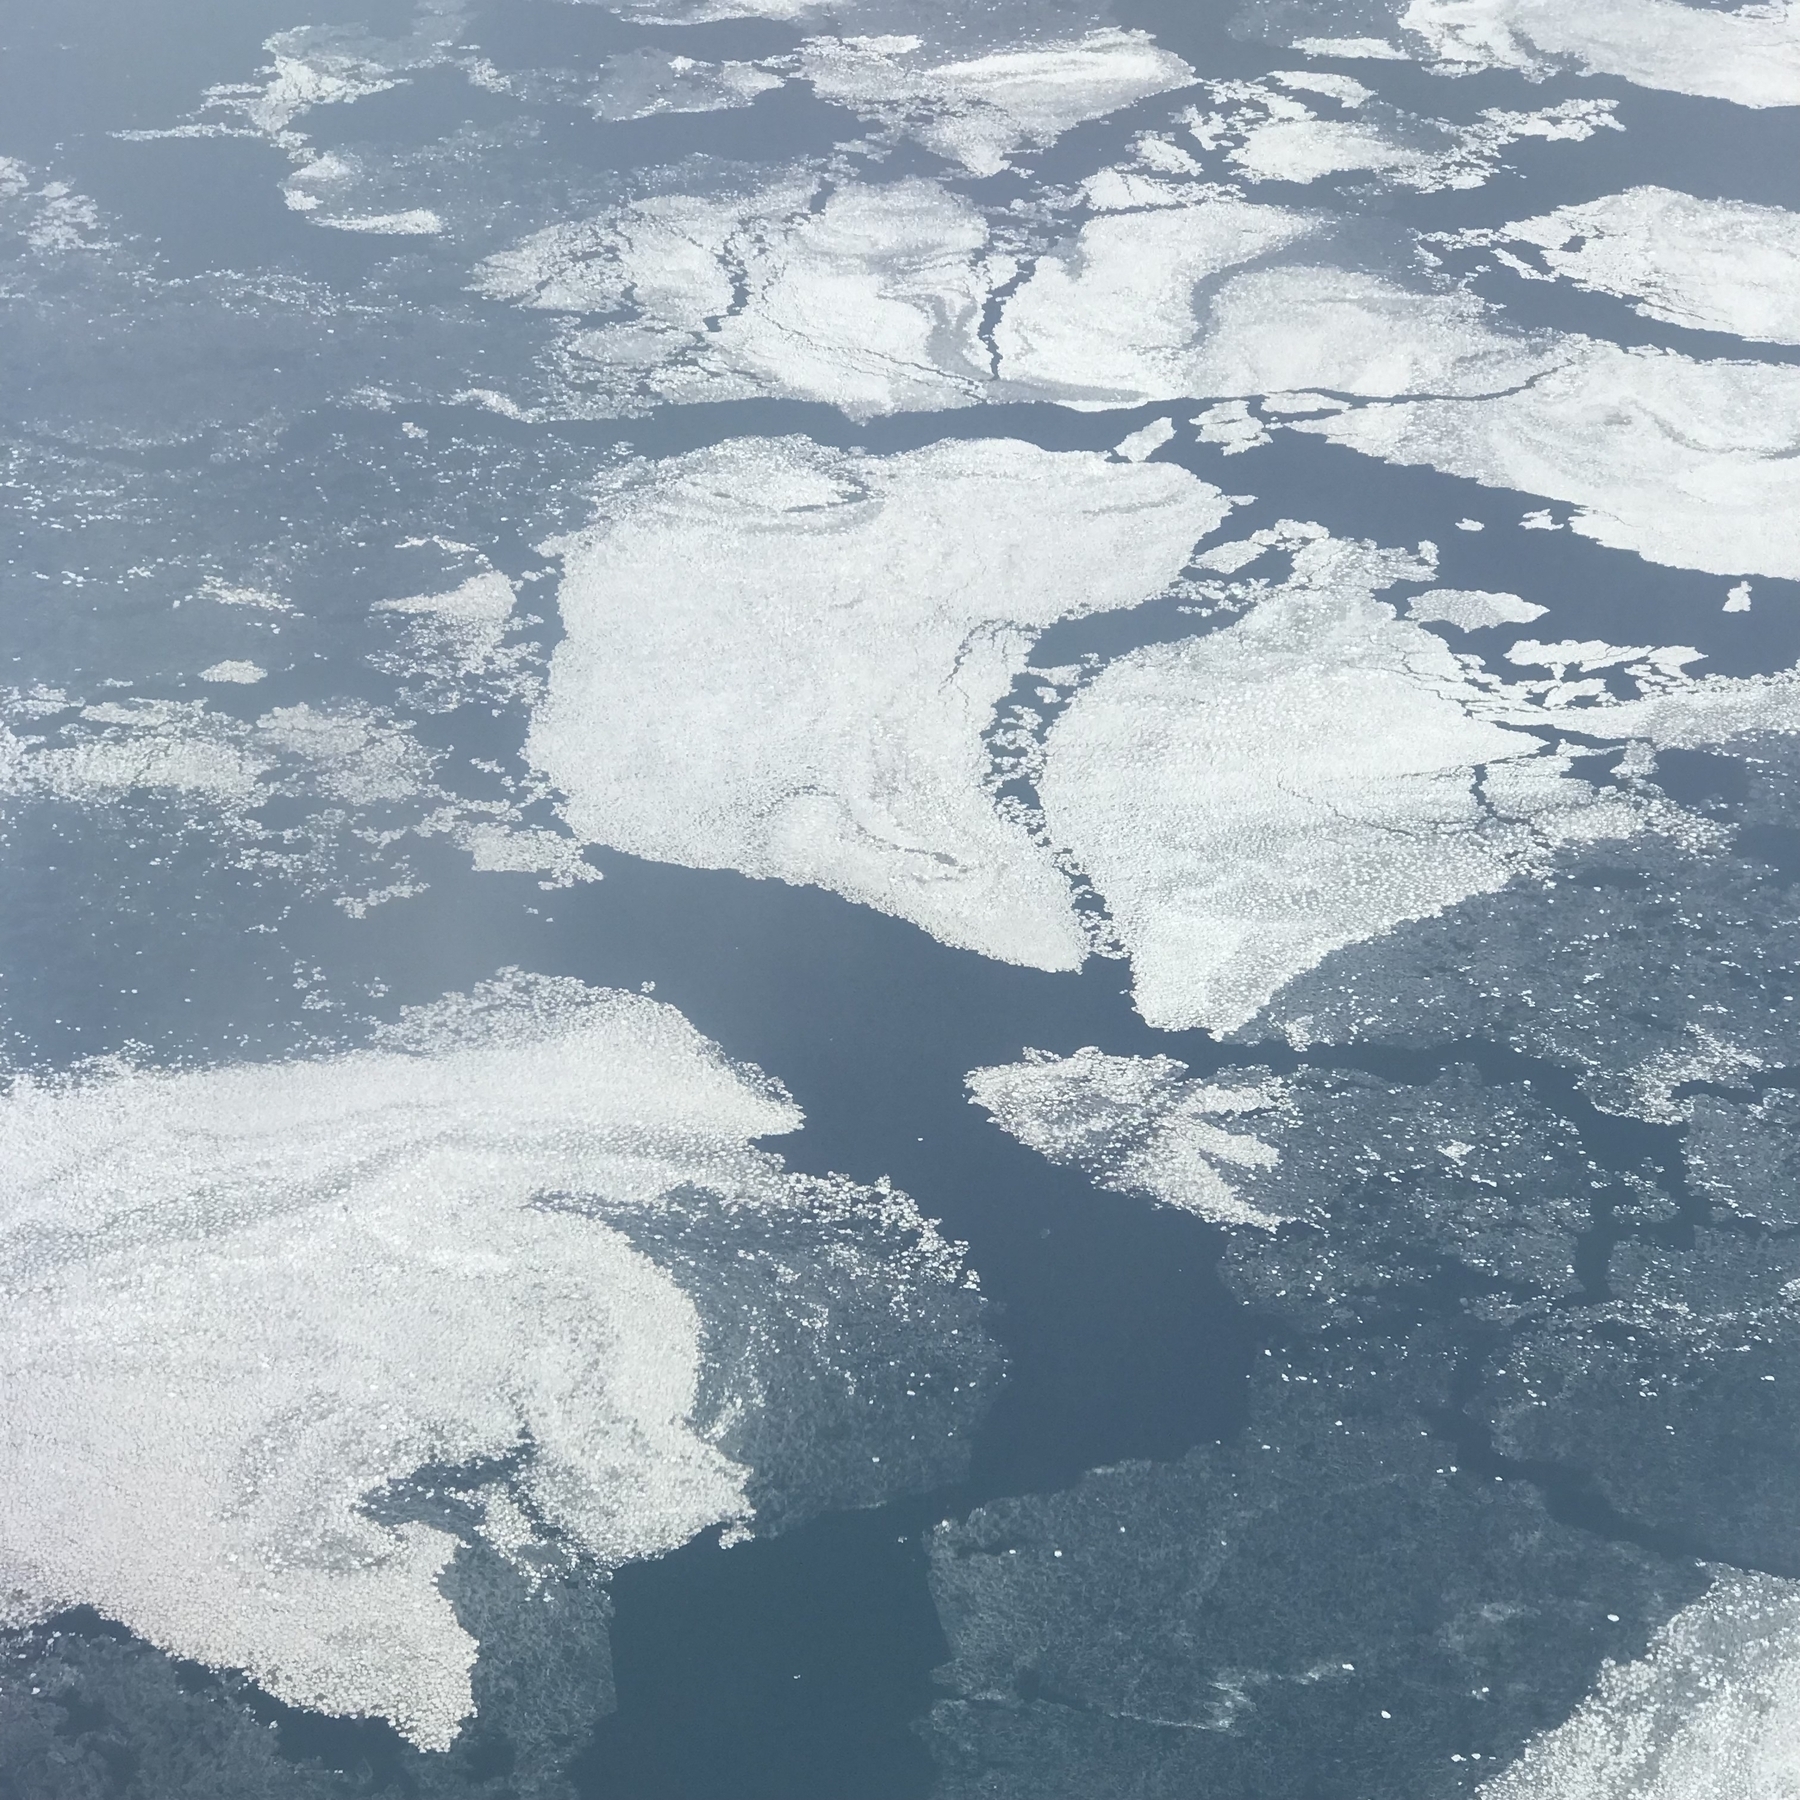 An aerial photo of Lake Michigan in the winter. Ice sheets of various sizes and densities cover most of the lake's surface.